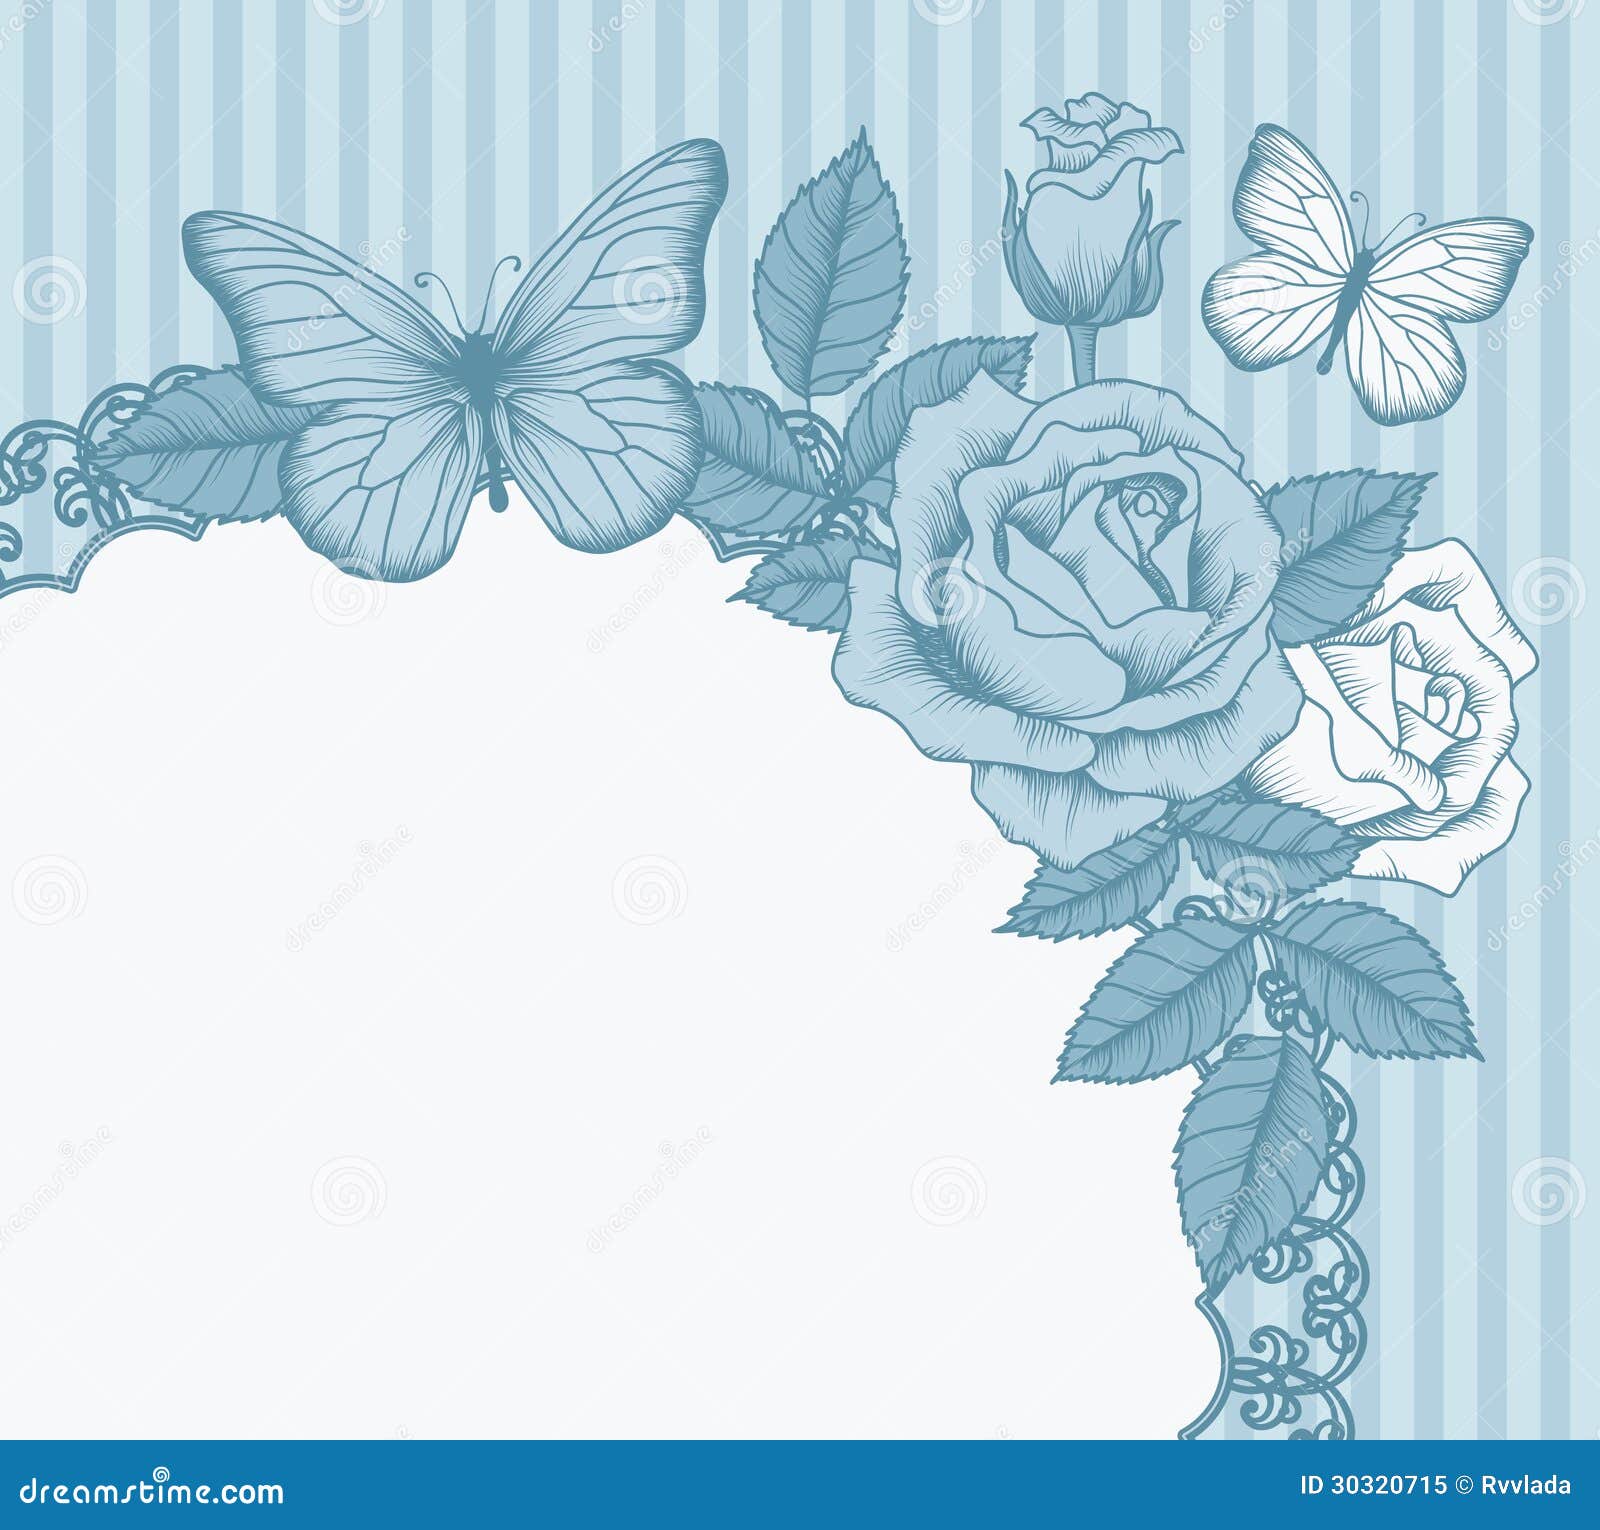 Frame with Flowers and Butterflies Stock Vector - Illustration of frame ...